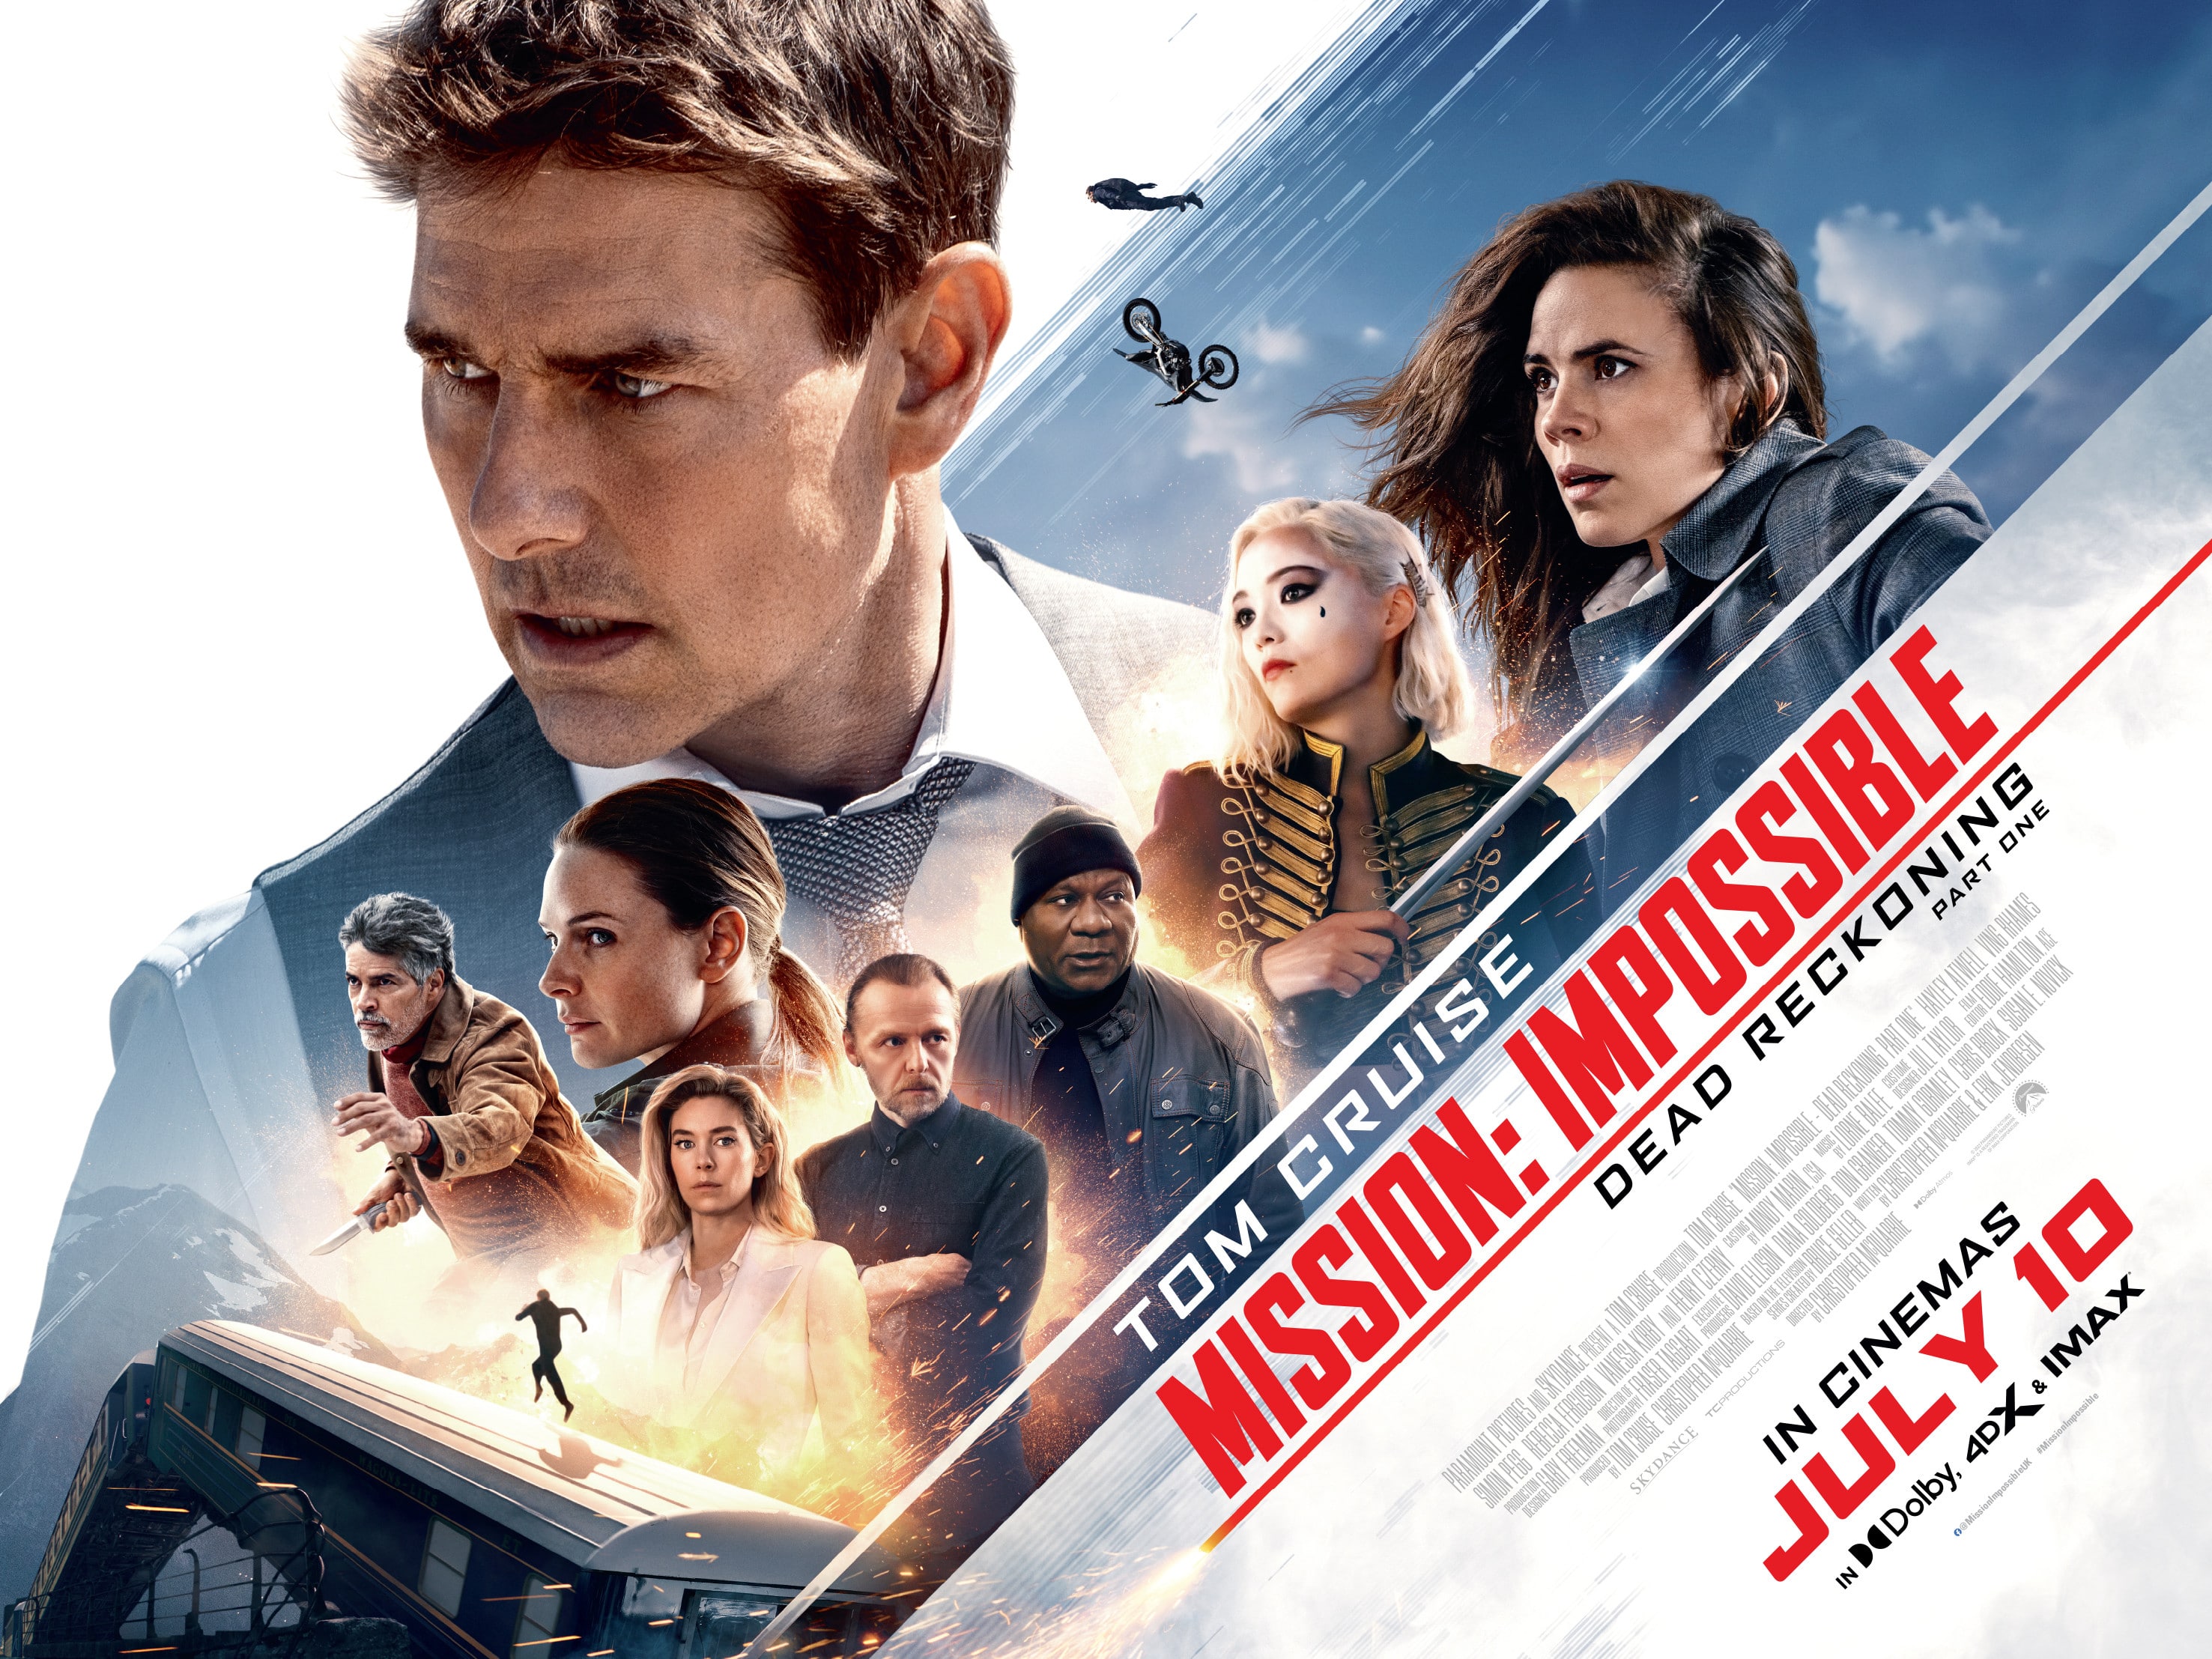 the new mission impossible movie review